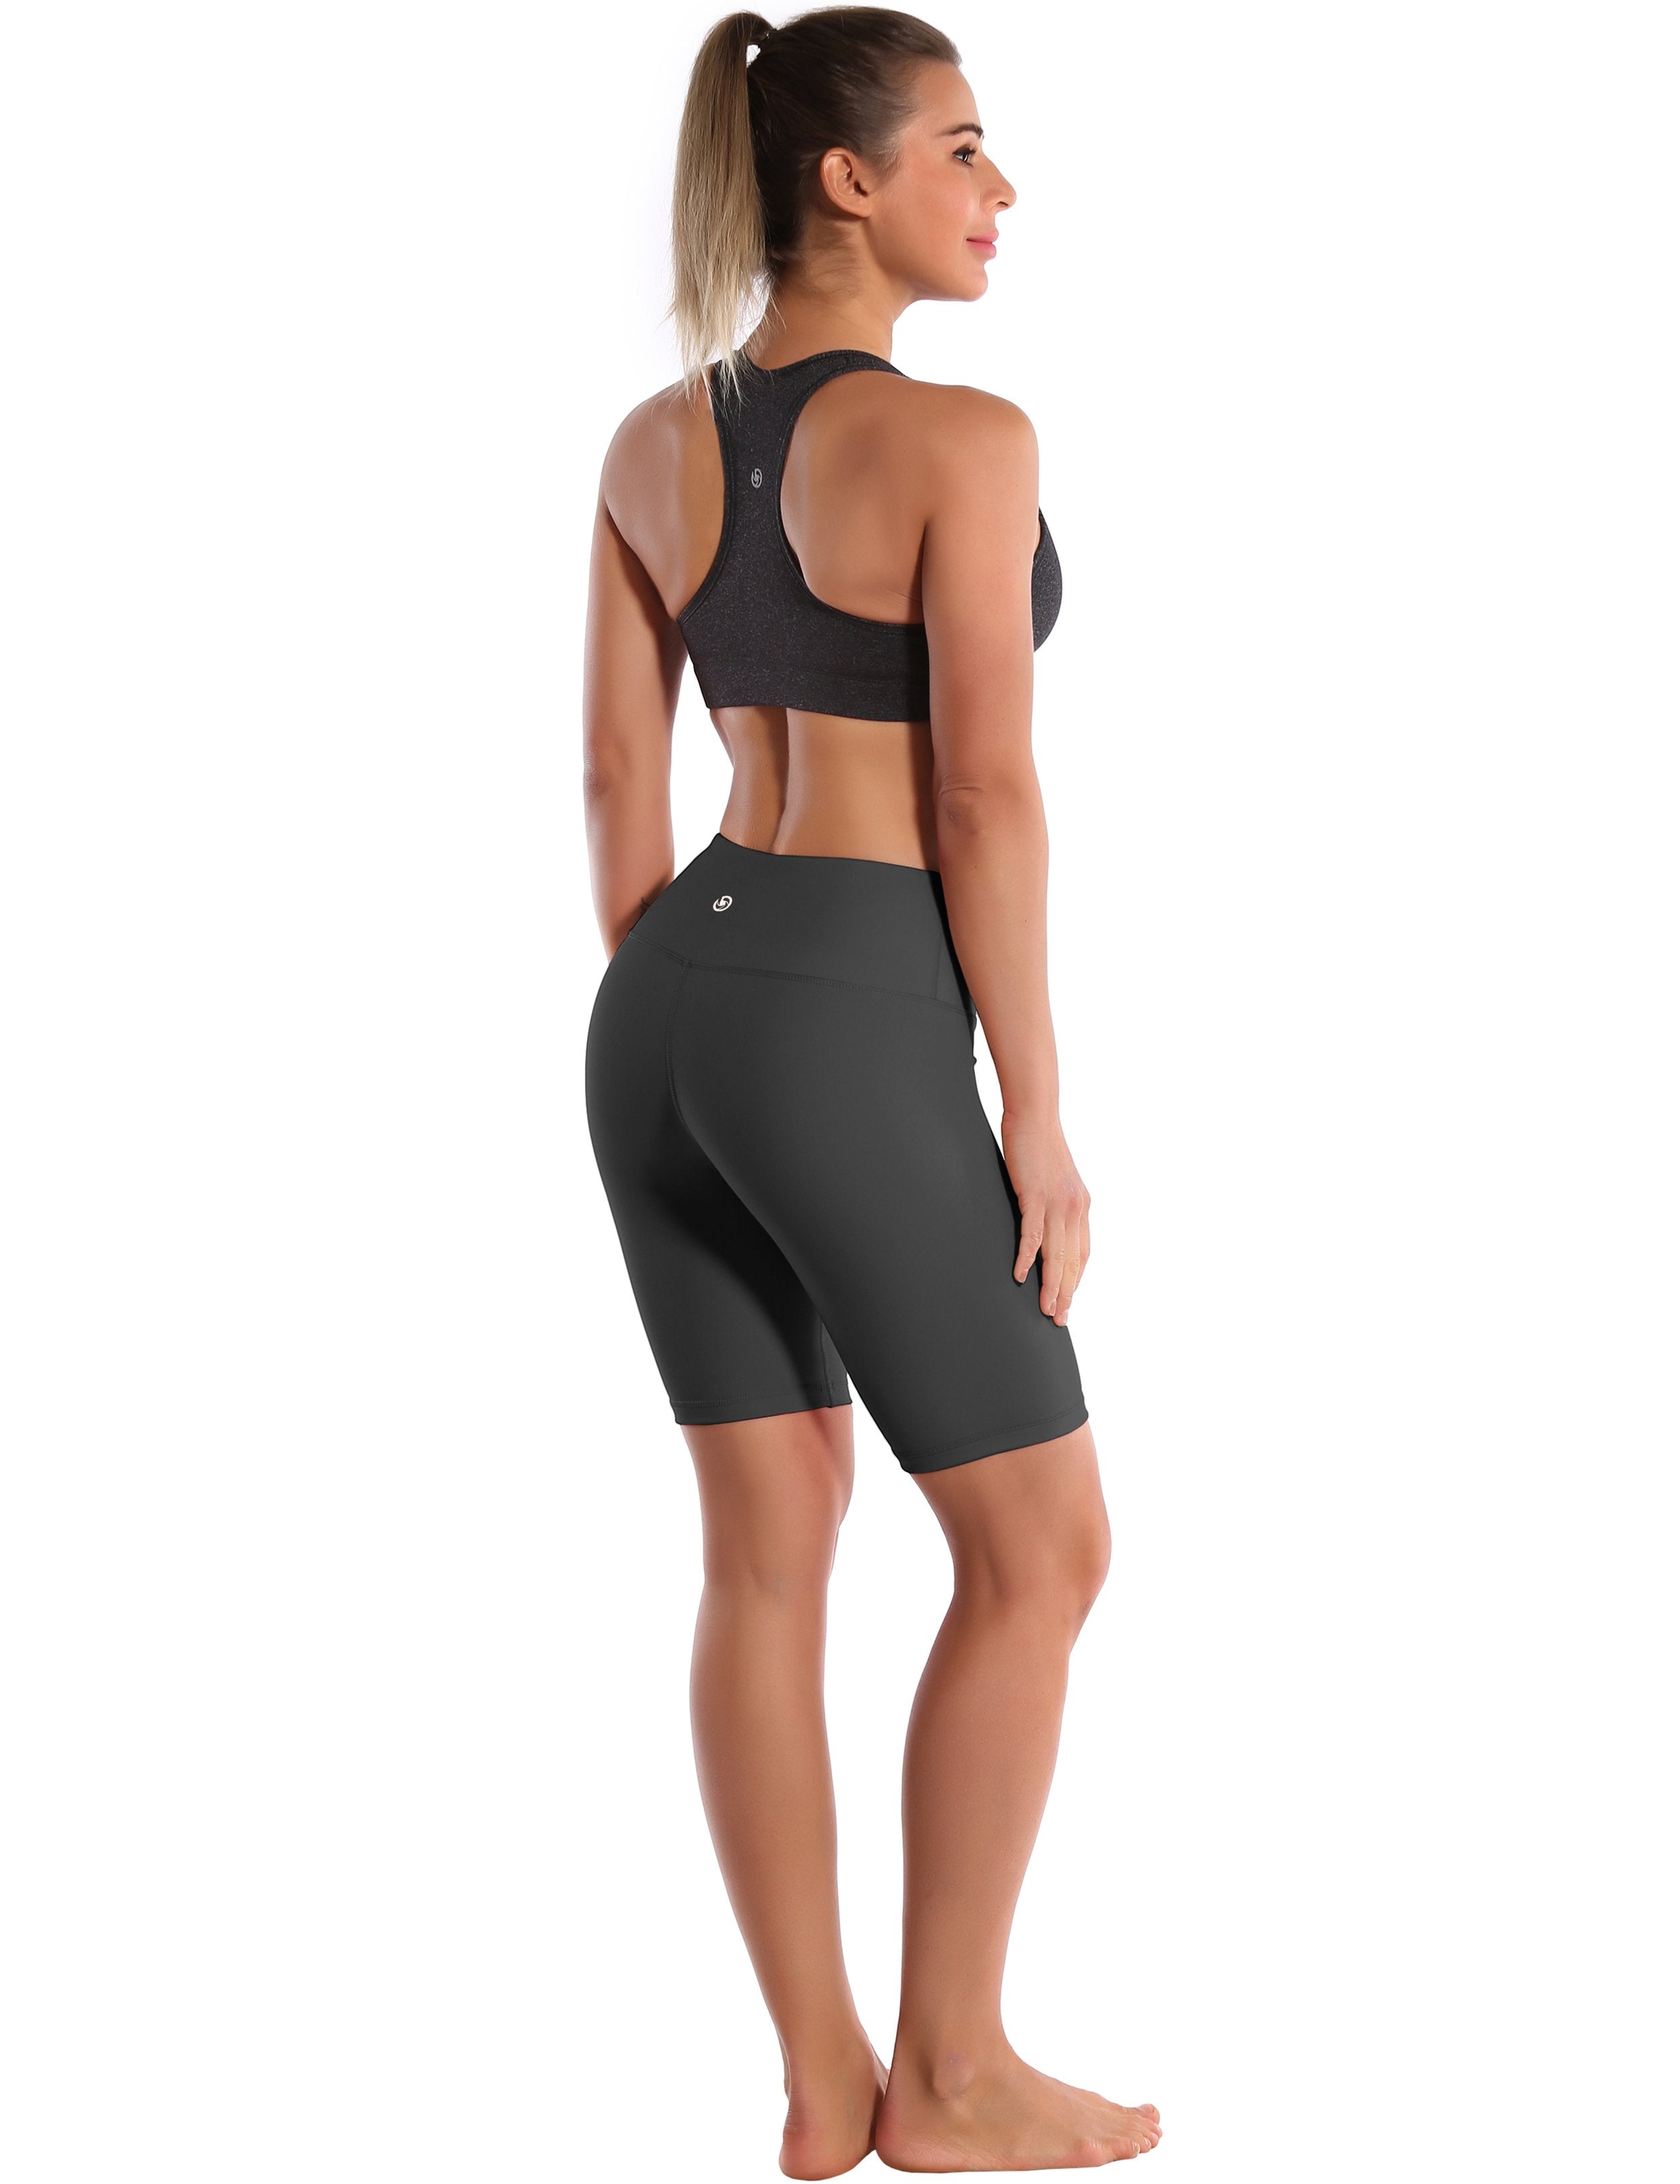 8" High Waist Plus Size Shorts shadowcharcoal Sleek, soft, smooth and totally comfortable: our newest style is here. Softest-ever fabric High elasticity High density 4-way stretch Fabric doesn't attract lint easily No see-through Moisture-wicking Machine wash 75% Nylon, 25% Spandex